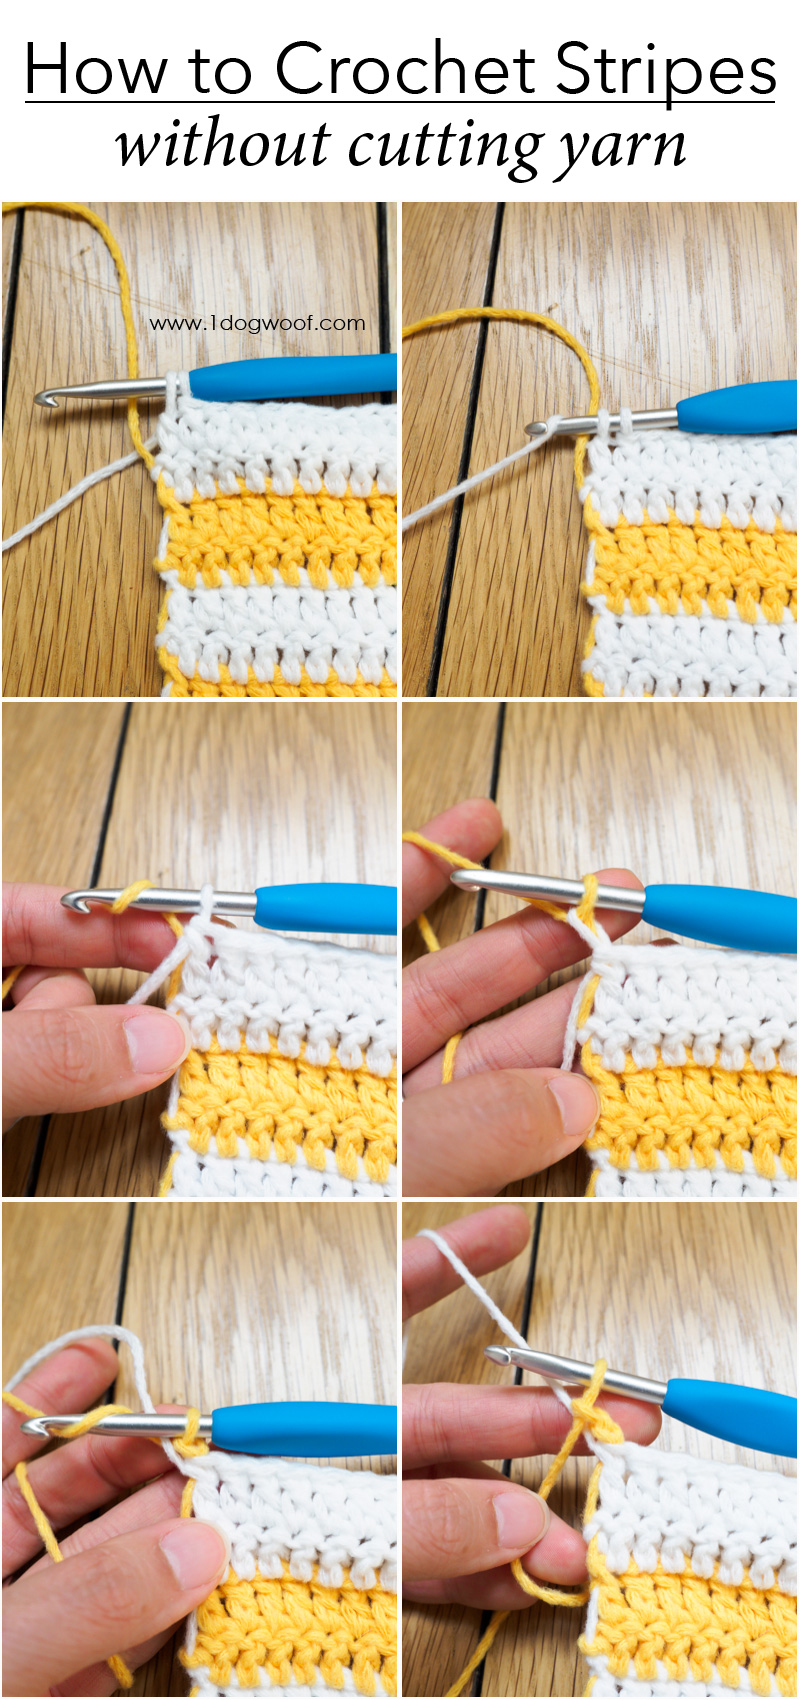 how to crochet stripes without cutting yarn pictorial